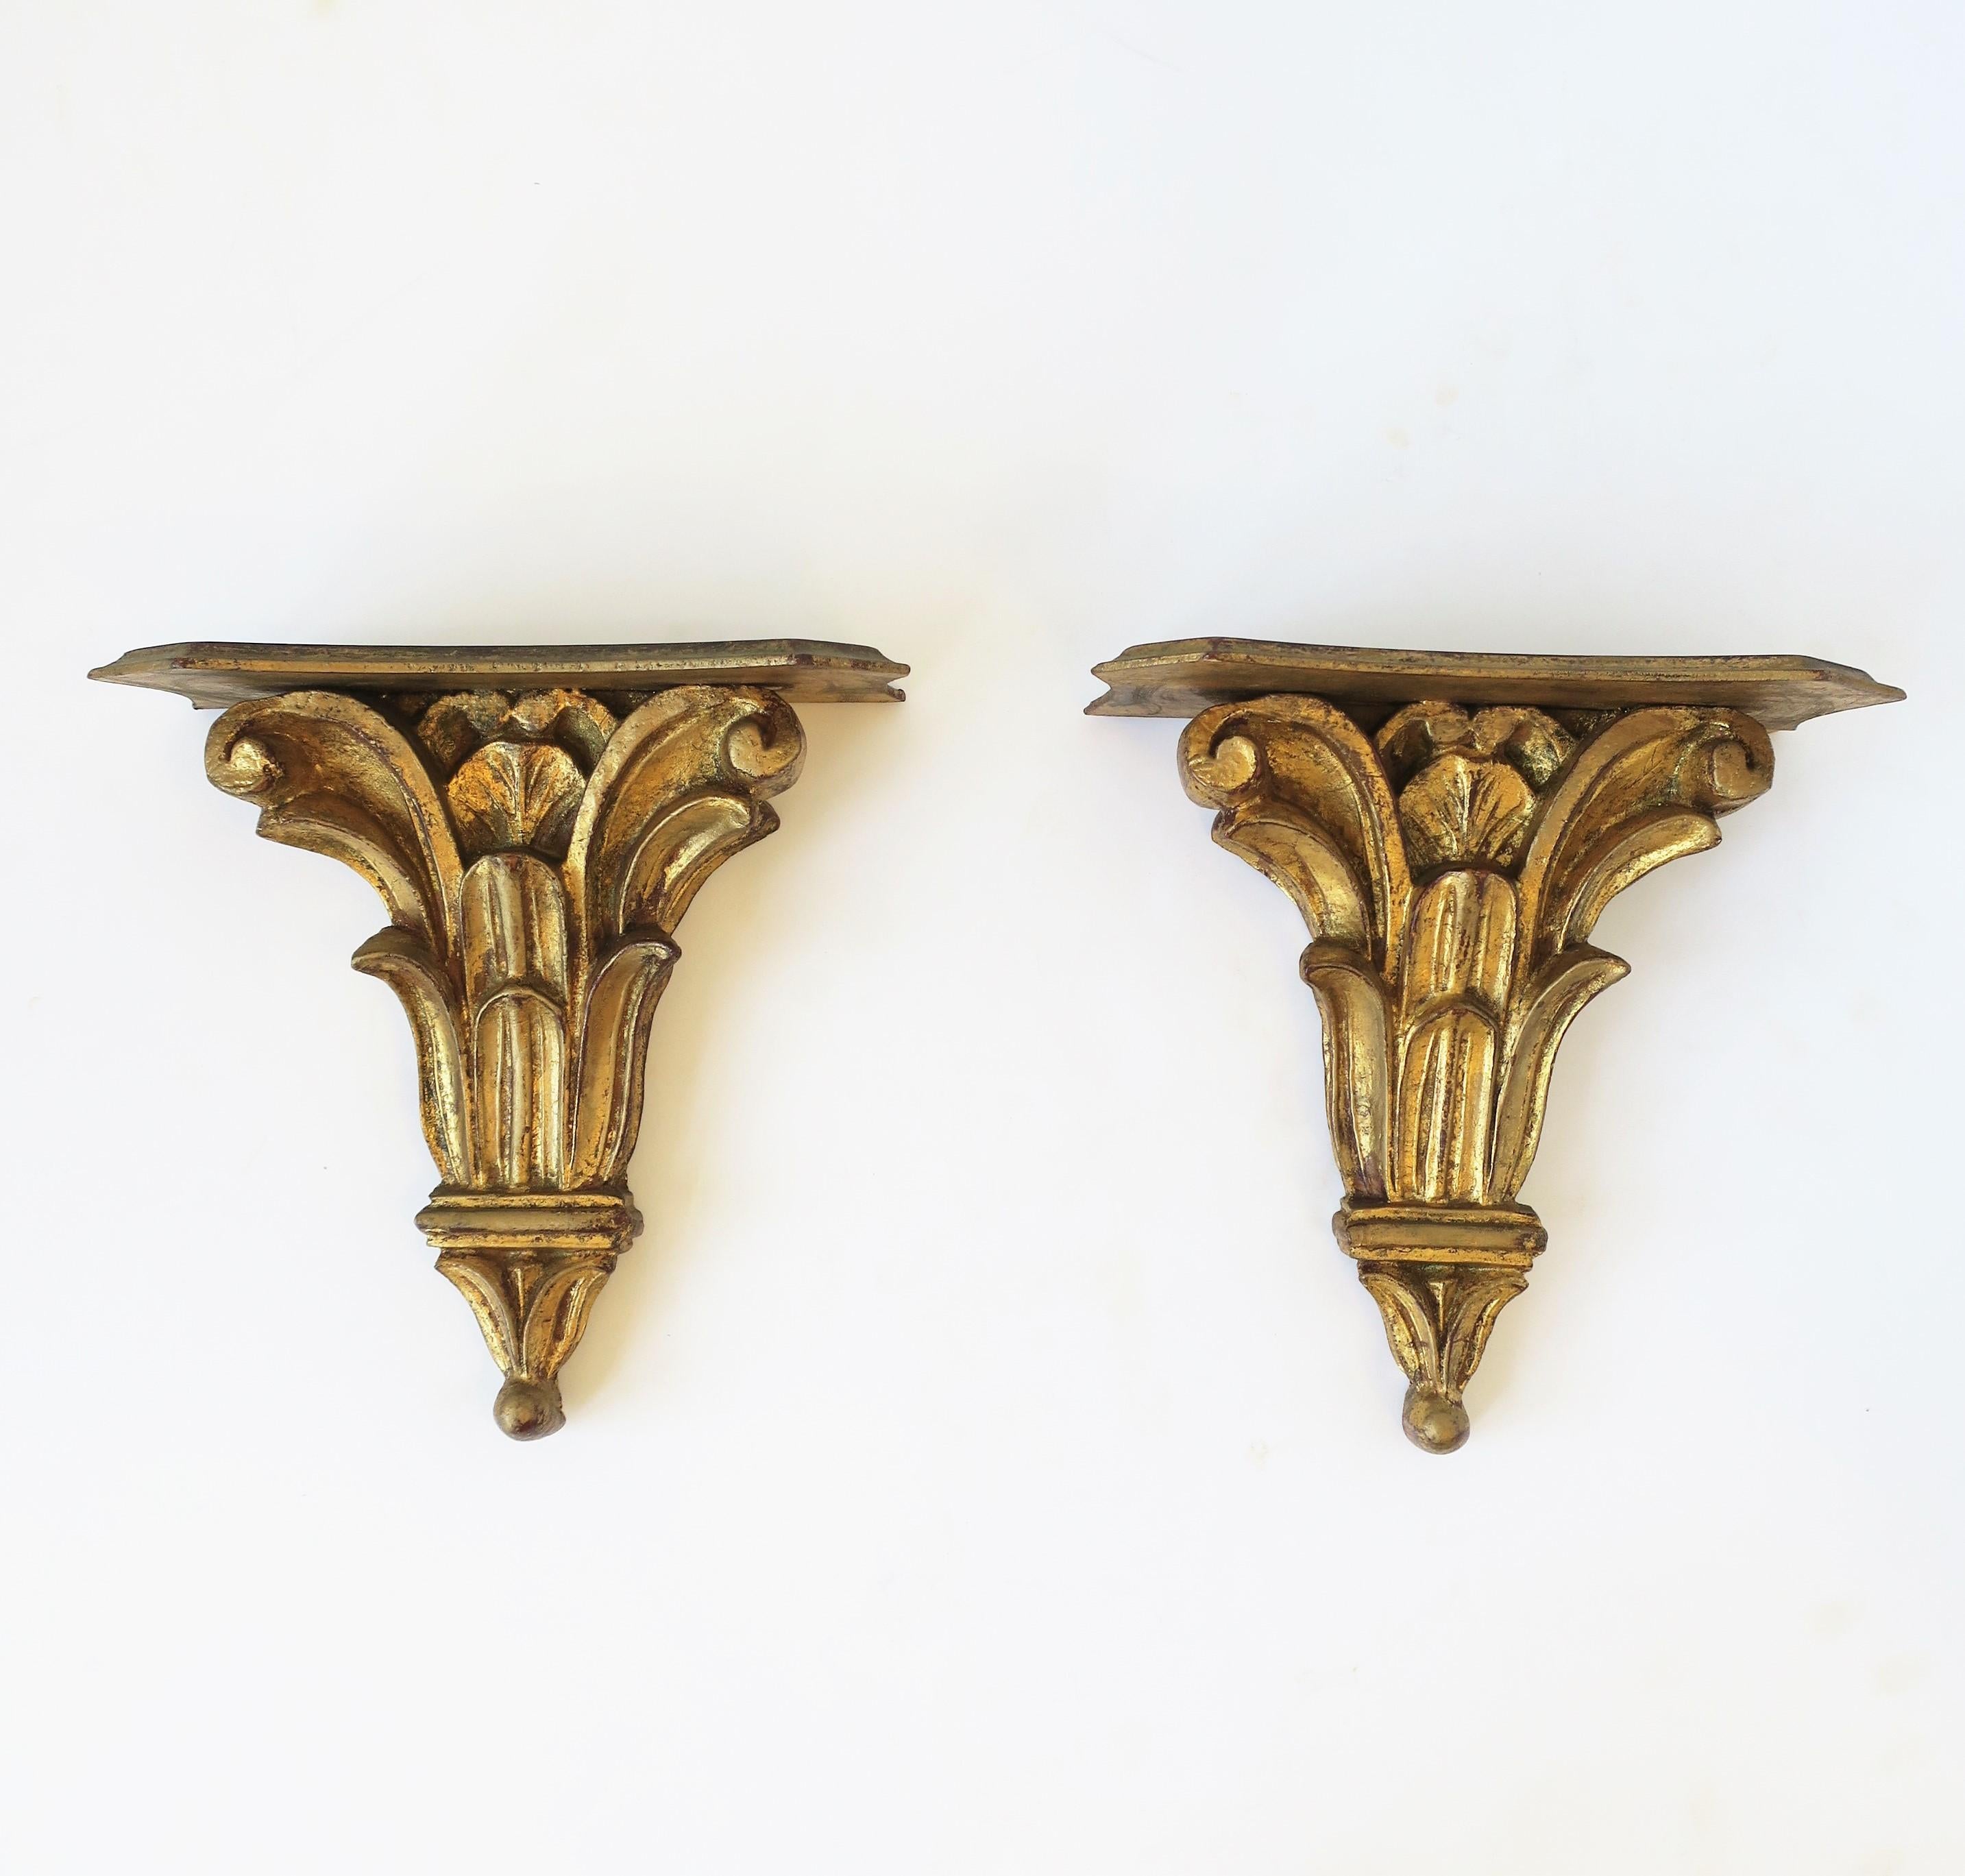 A beautiful pair of Italian gold giltwood gold-leaf wall shelves with acanthus leaf design in the neoclassical style, circa early 20th century, Italy. Each are marked on back 